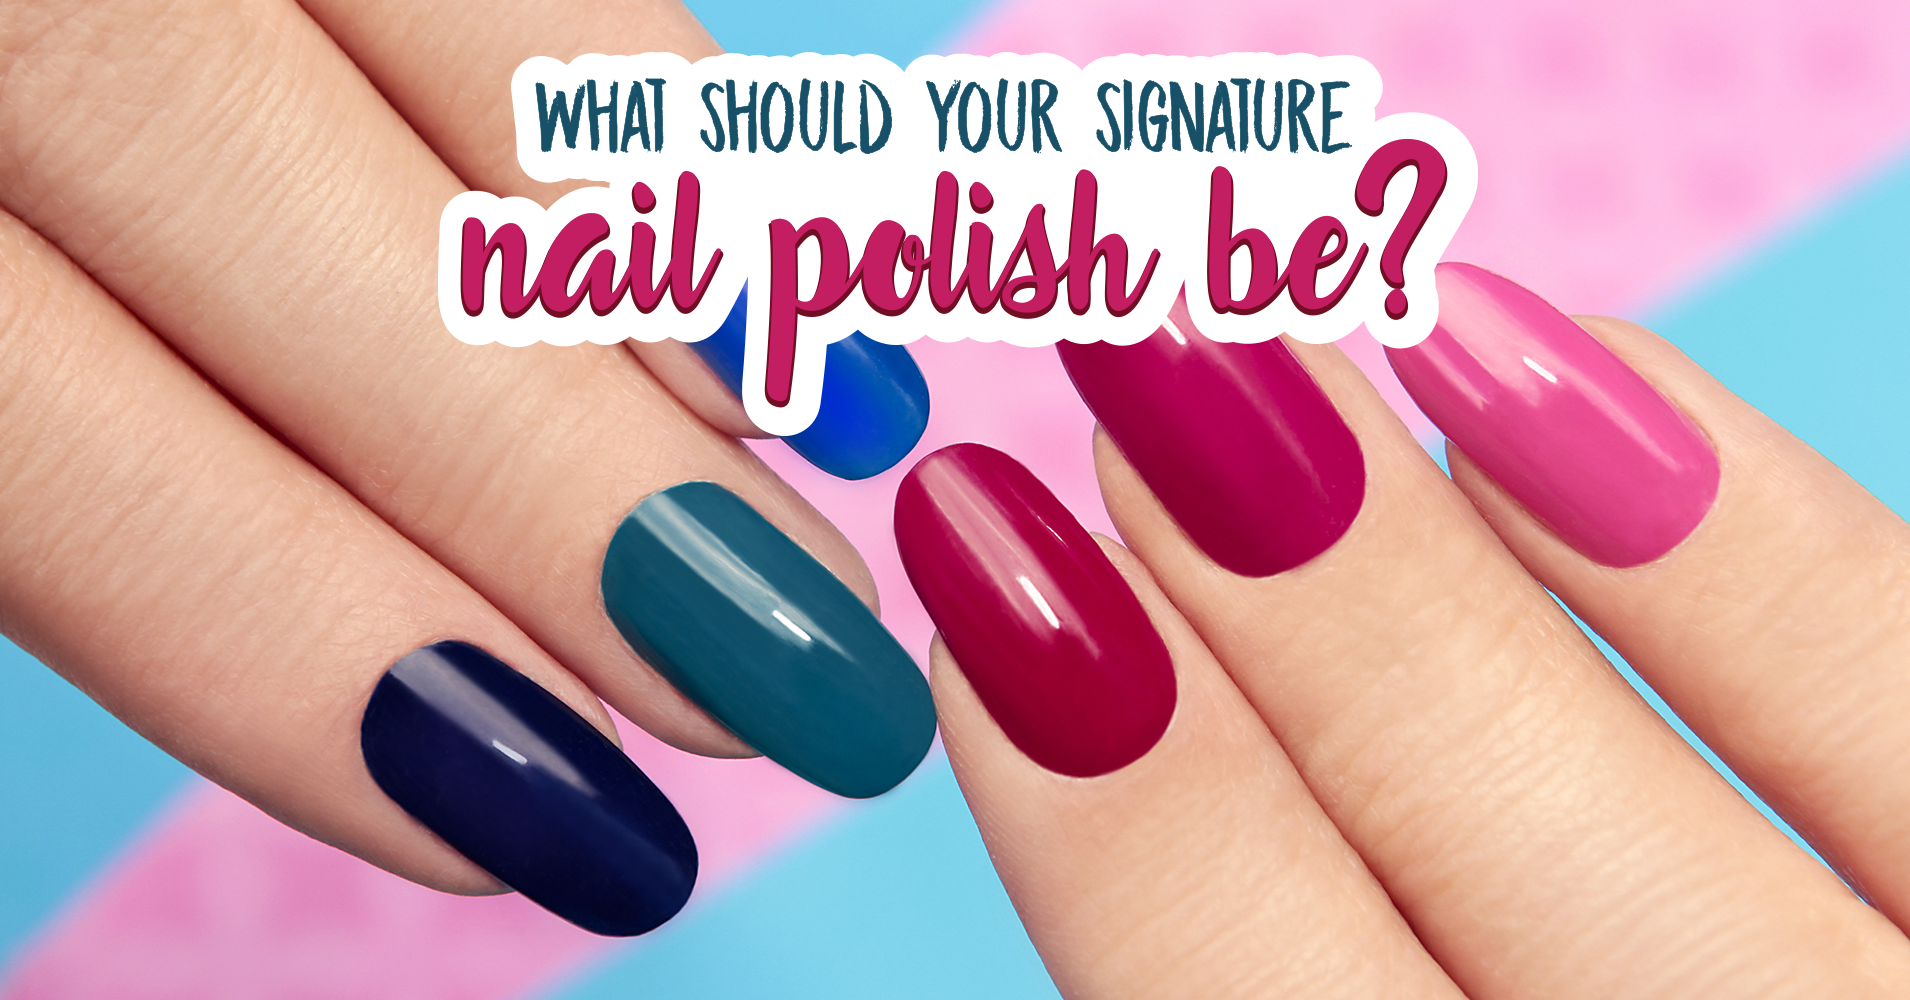 2. "Take Our Nail Color Quiz and Discover Your Signature Shade!" - wide 4